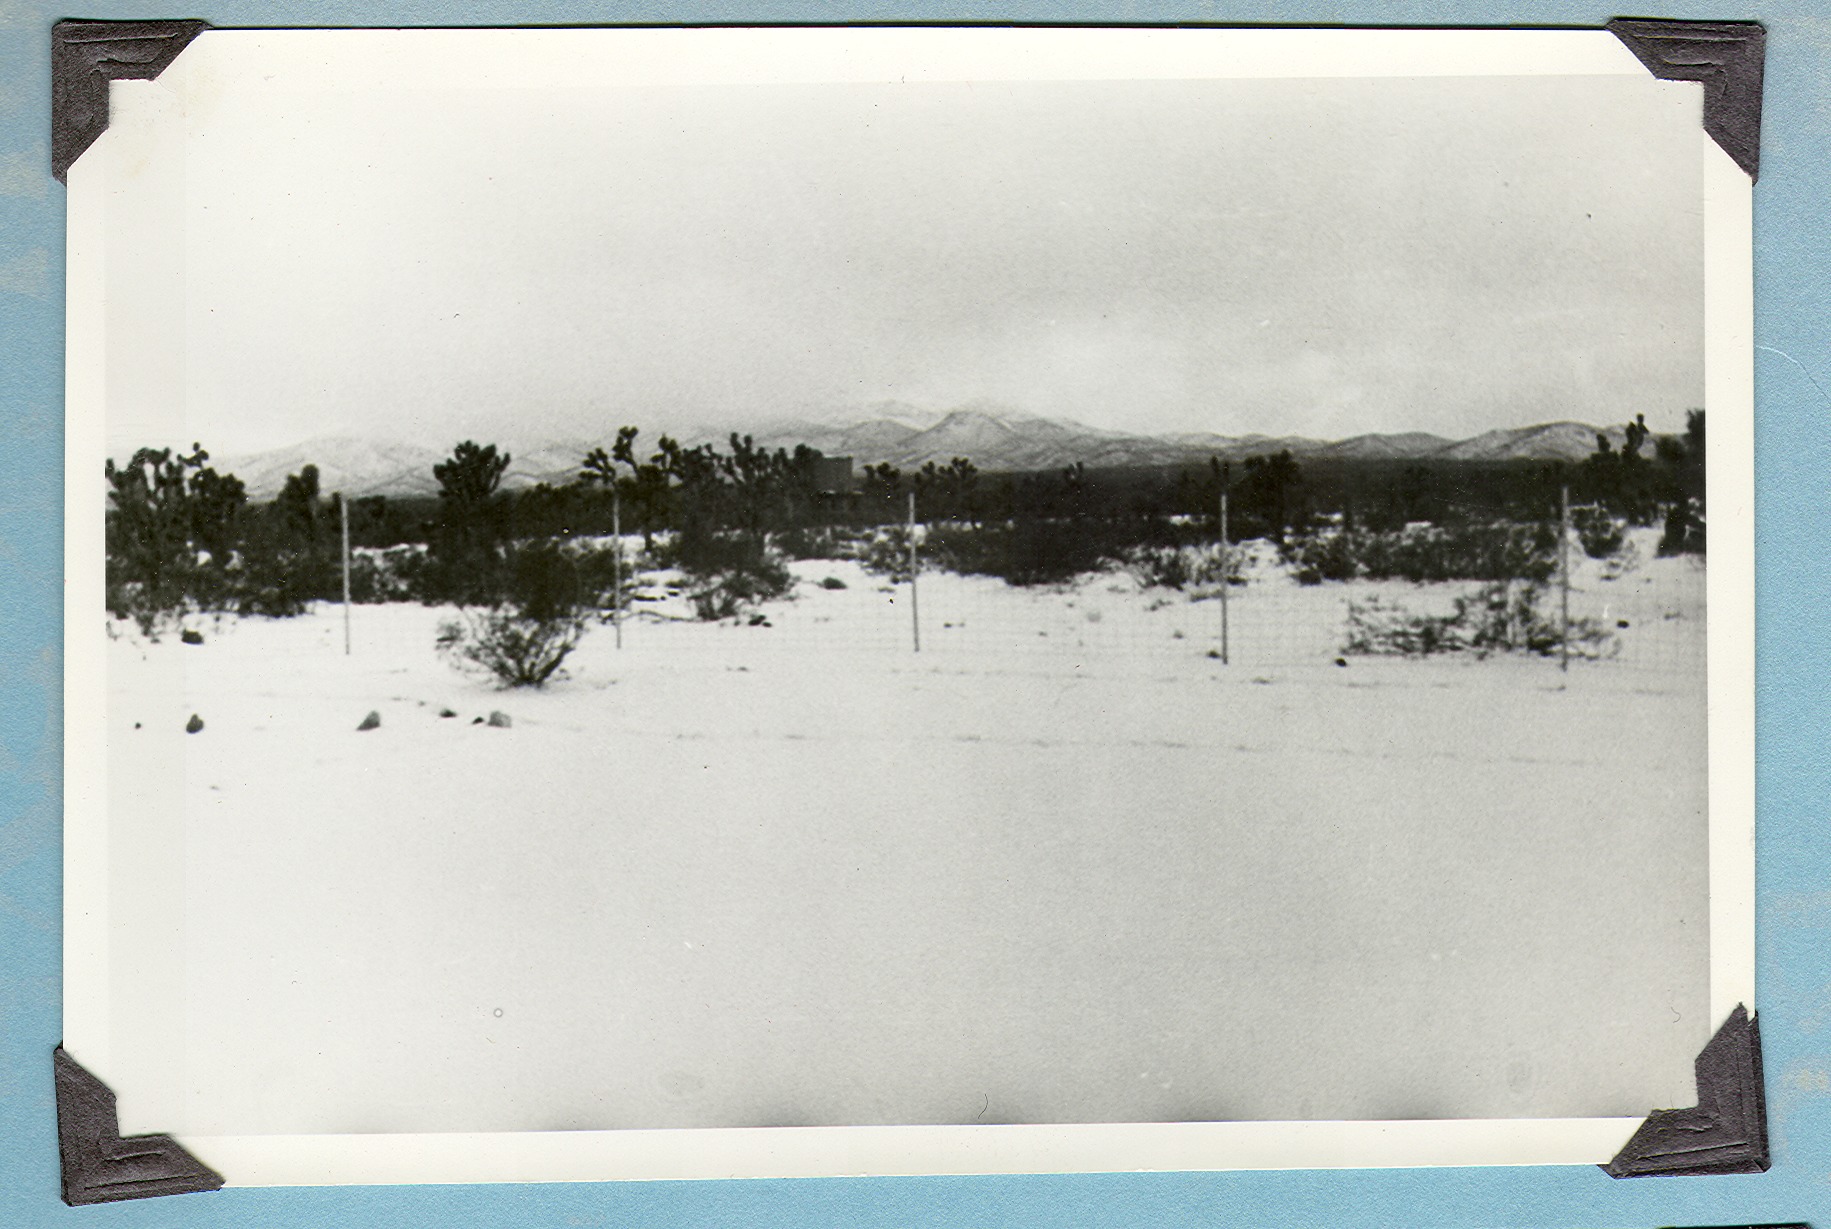 Desert scene on the ranch after snowfall: photographic print